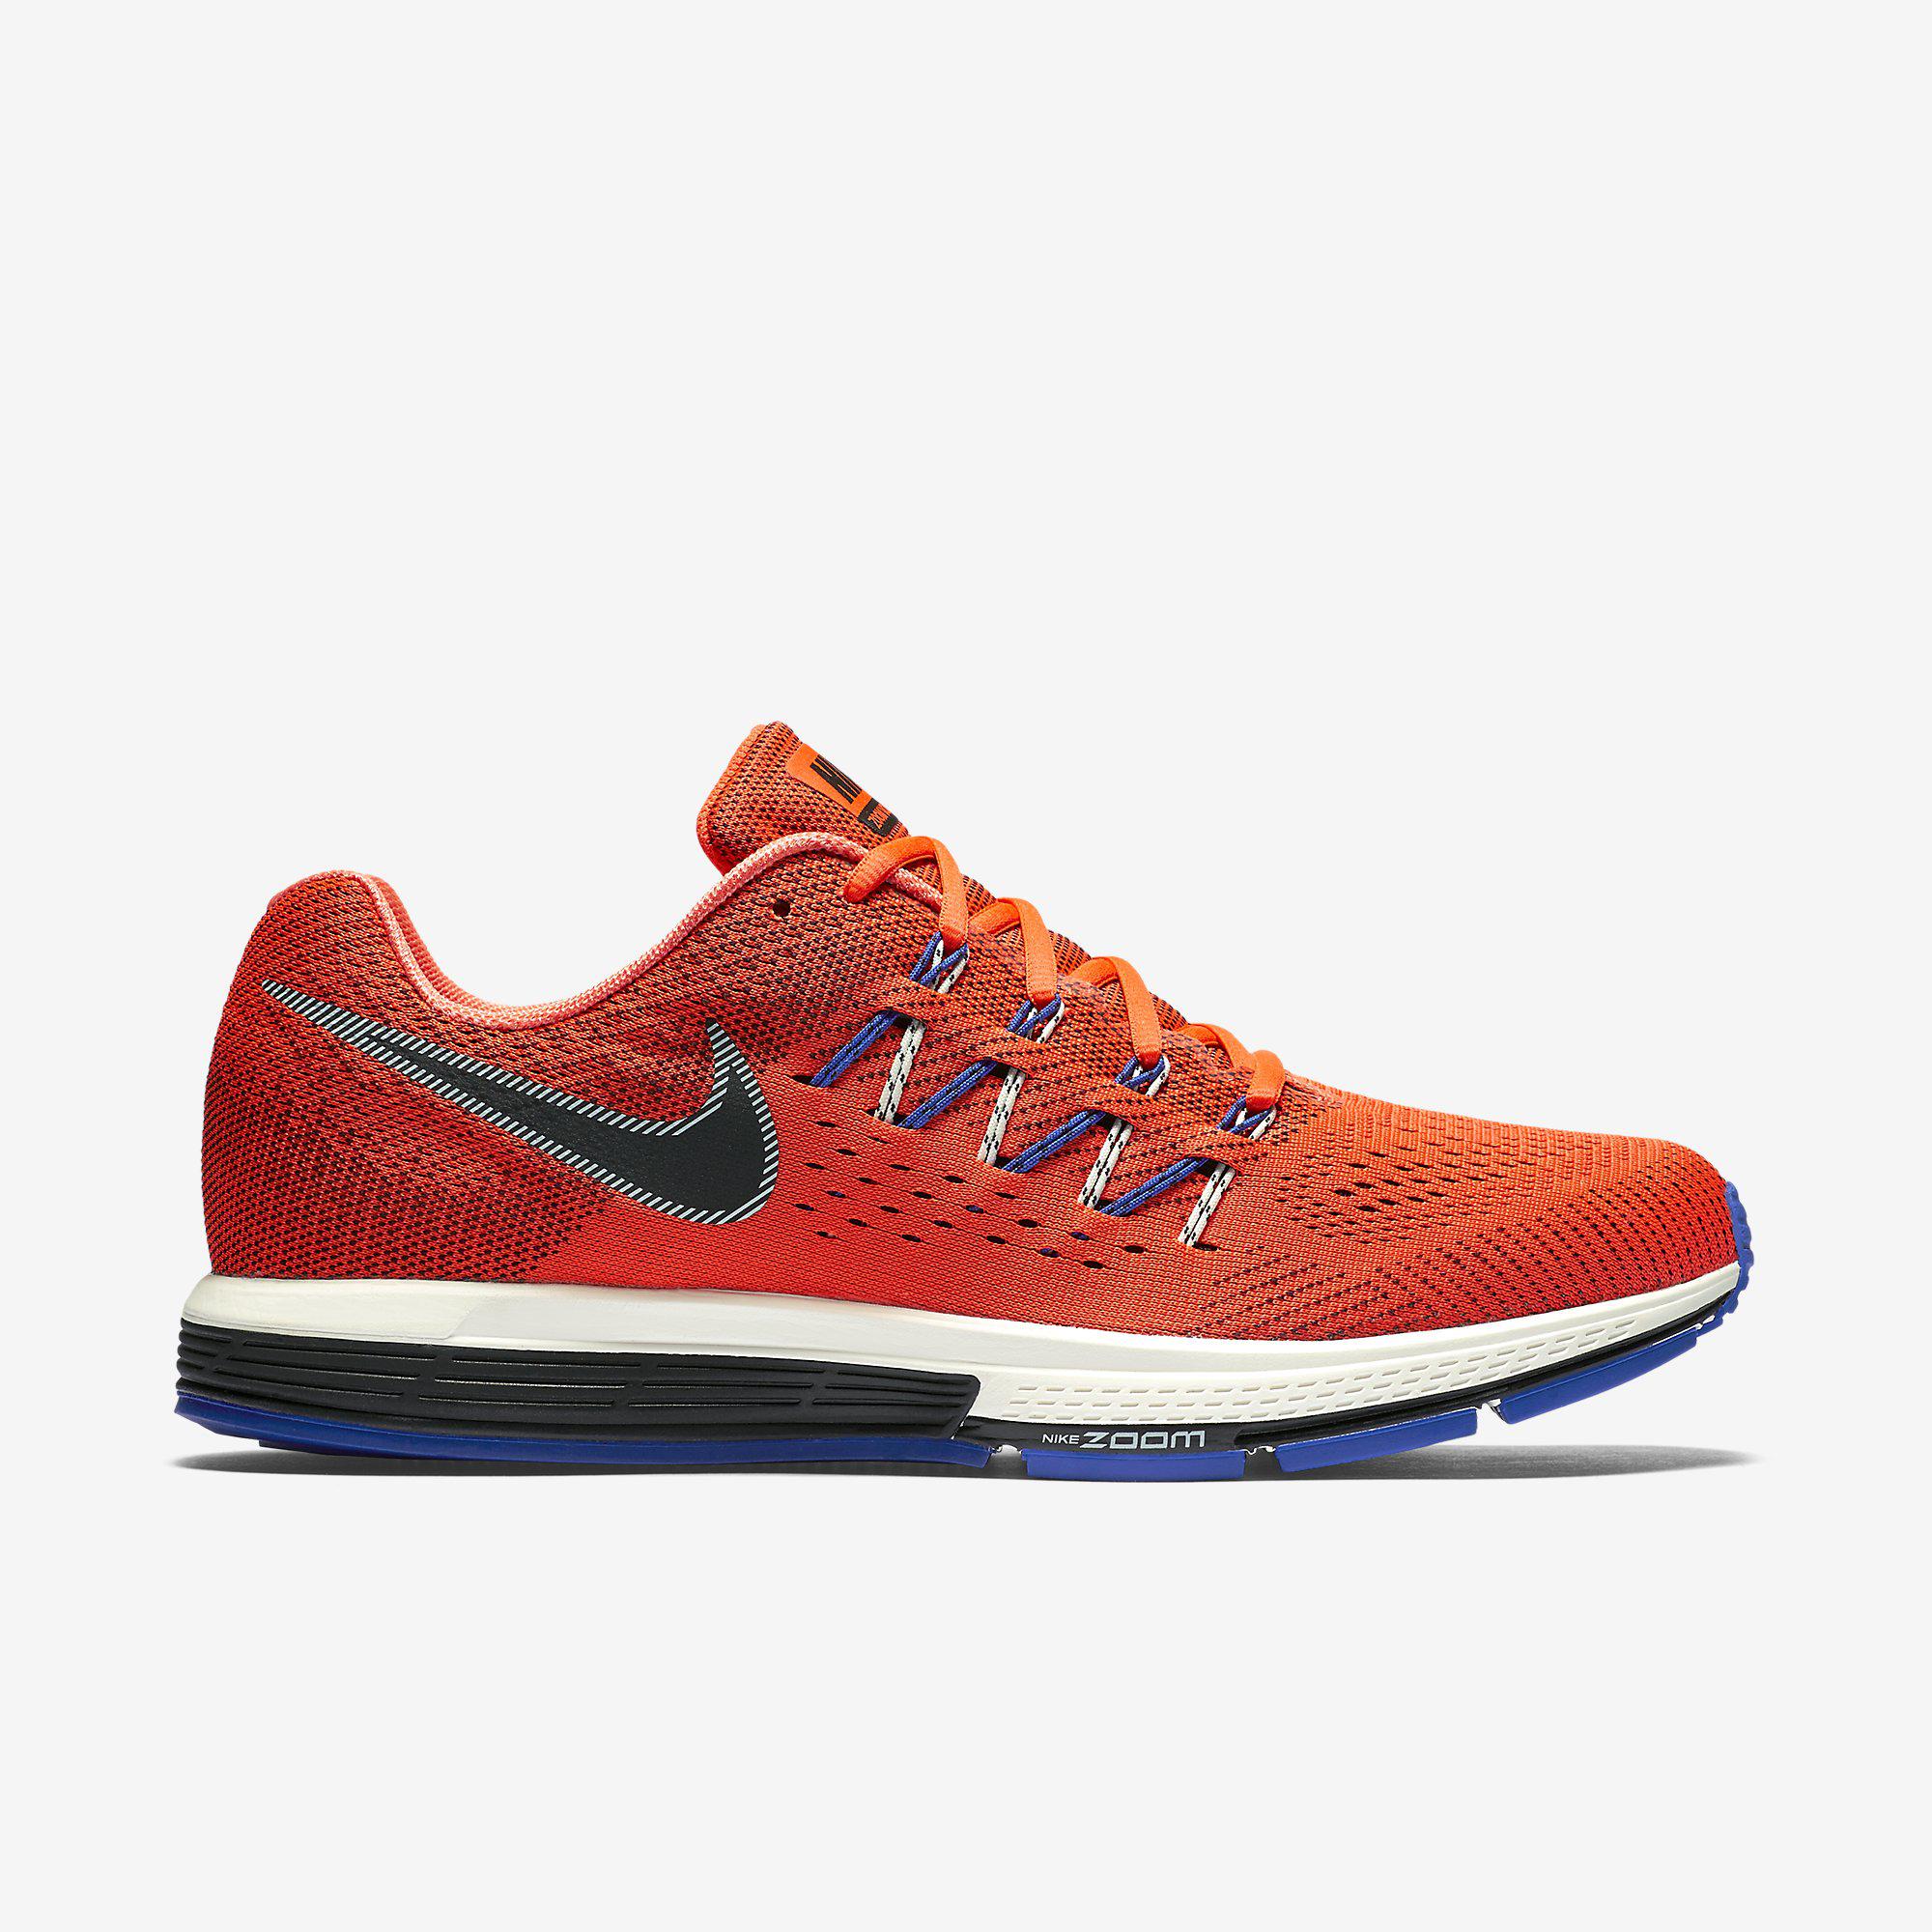 Nike Mens Air Zoom Vomero 10 Running Shoes - Total Crimson/Racer Blue ...